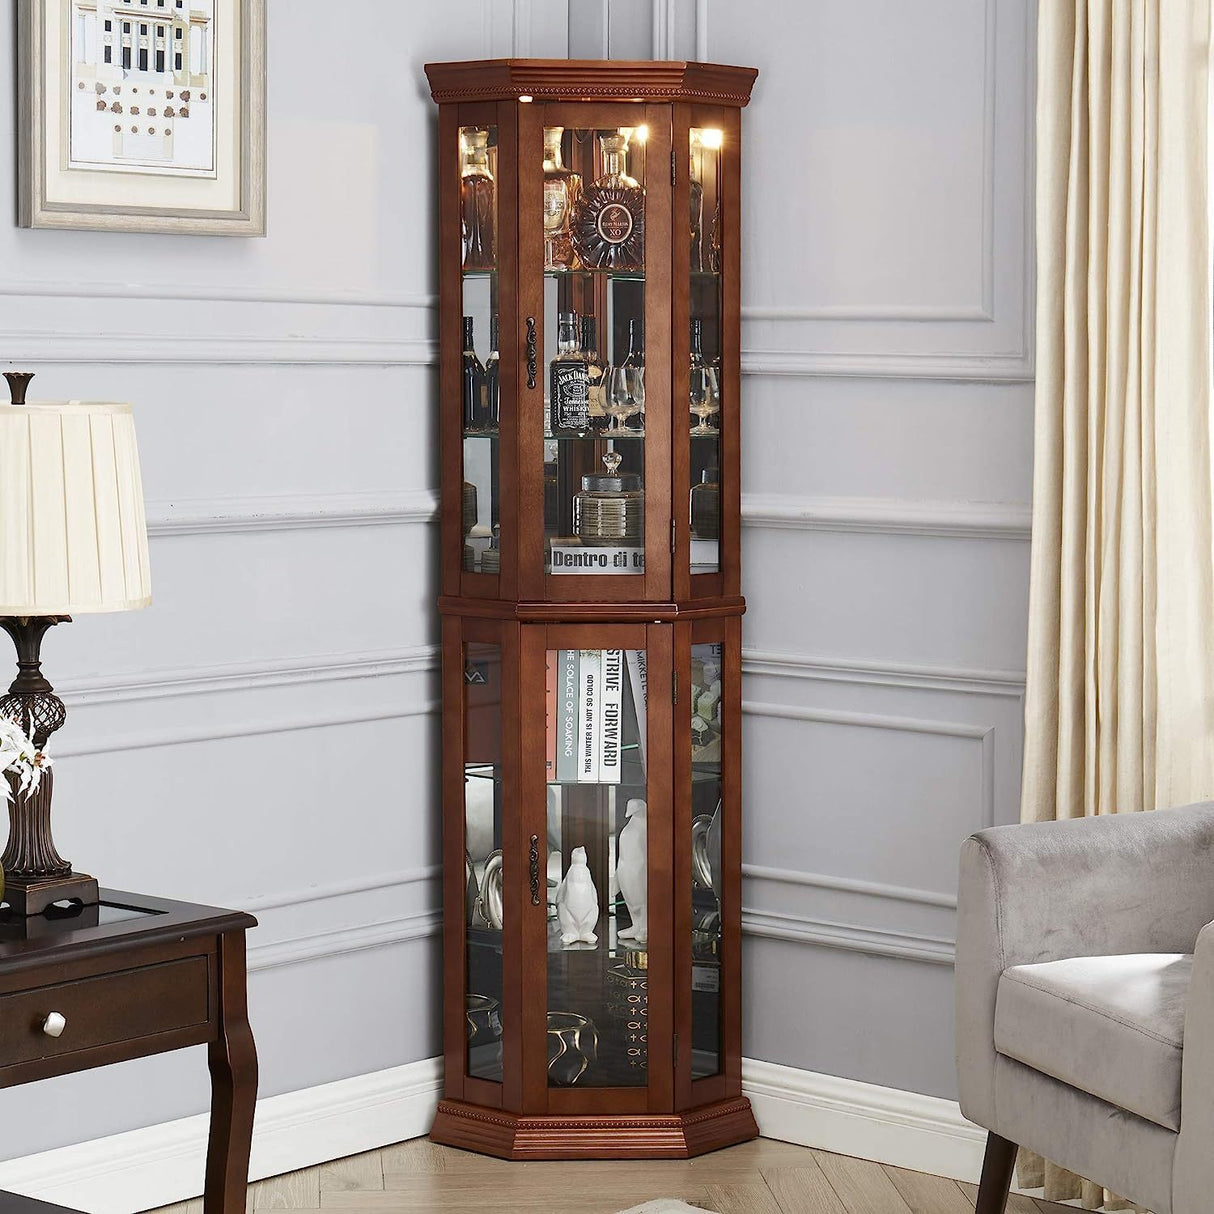 Corner Curio Cabinet with Lights, Adjustable Tempered Glass Shelves, Mirrored Back, Display Cabinet,Walnut (E26 light bulb not included) Home Elegance USA